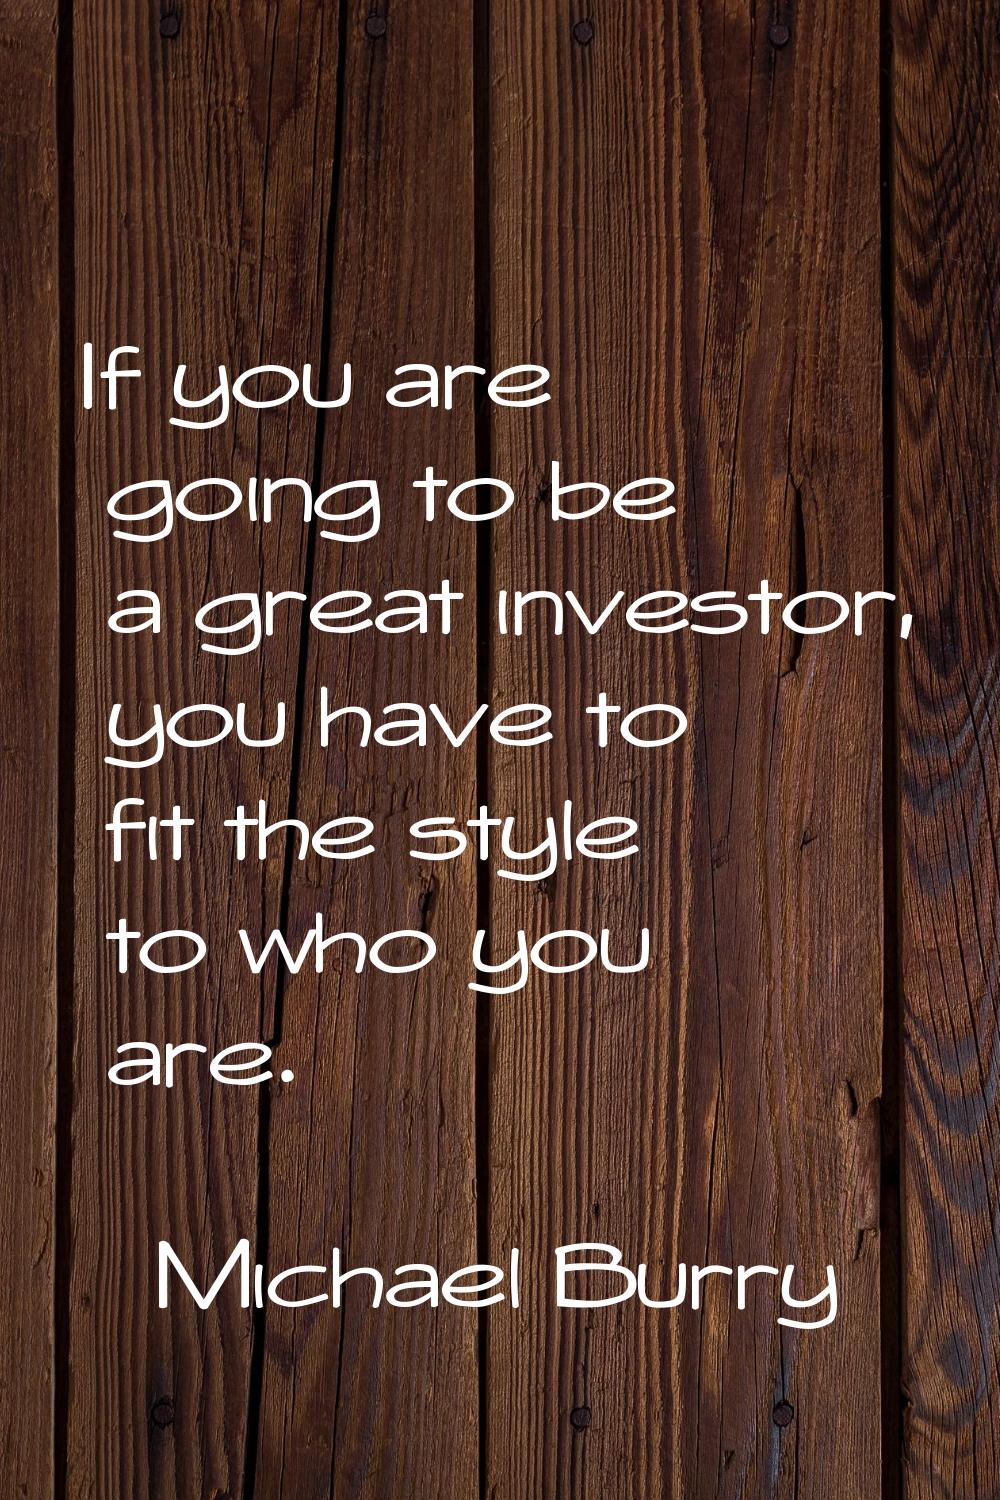 If you are going to be a great investor, you have to fit the style to who you are.